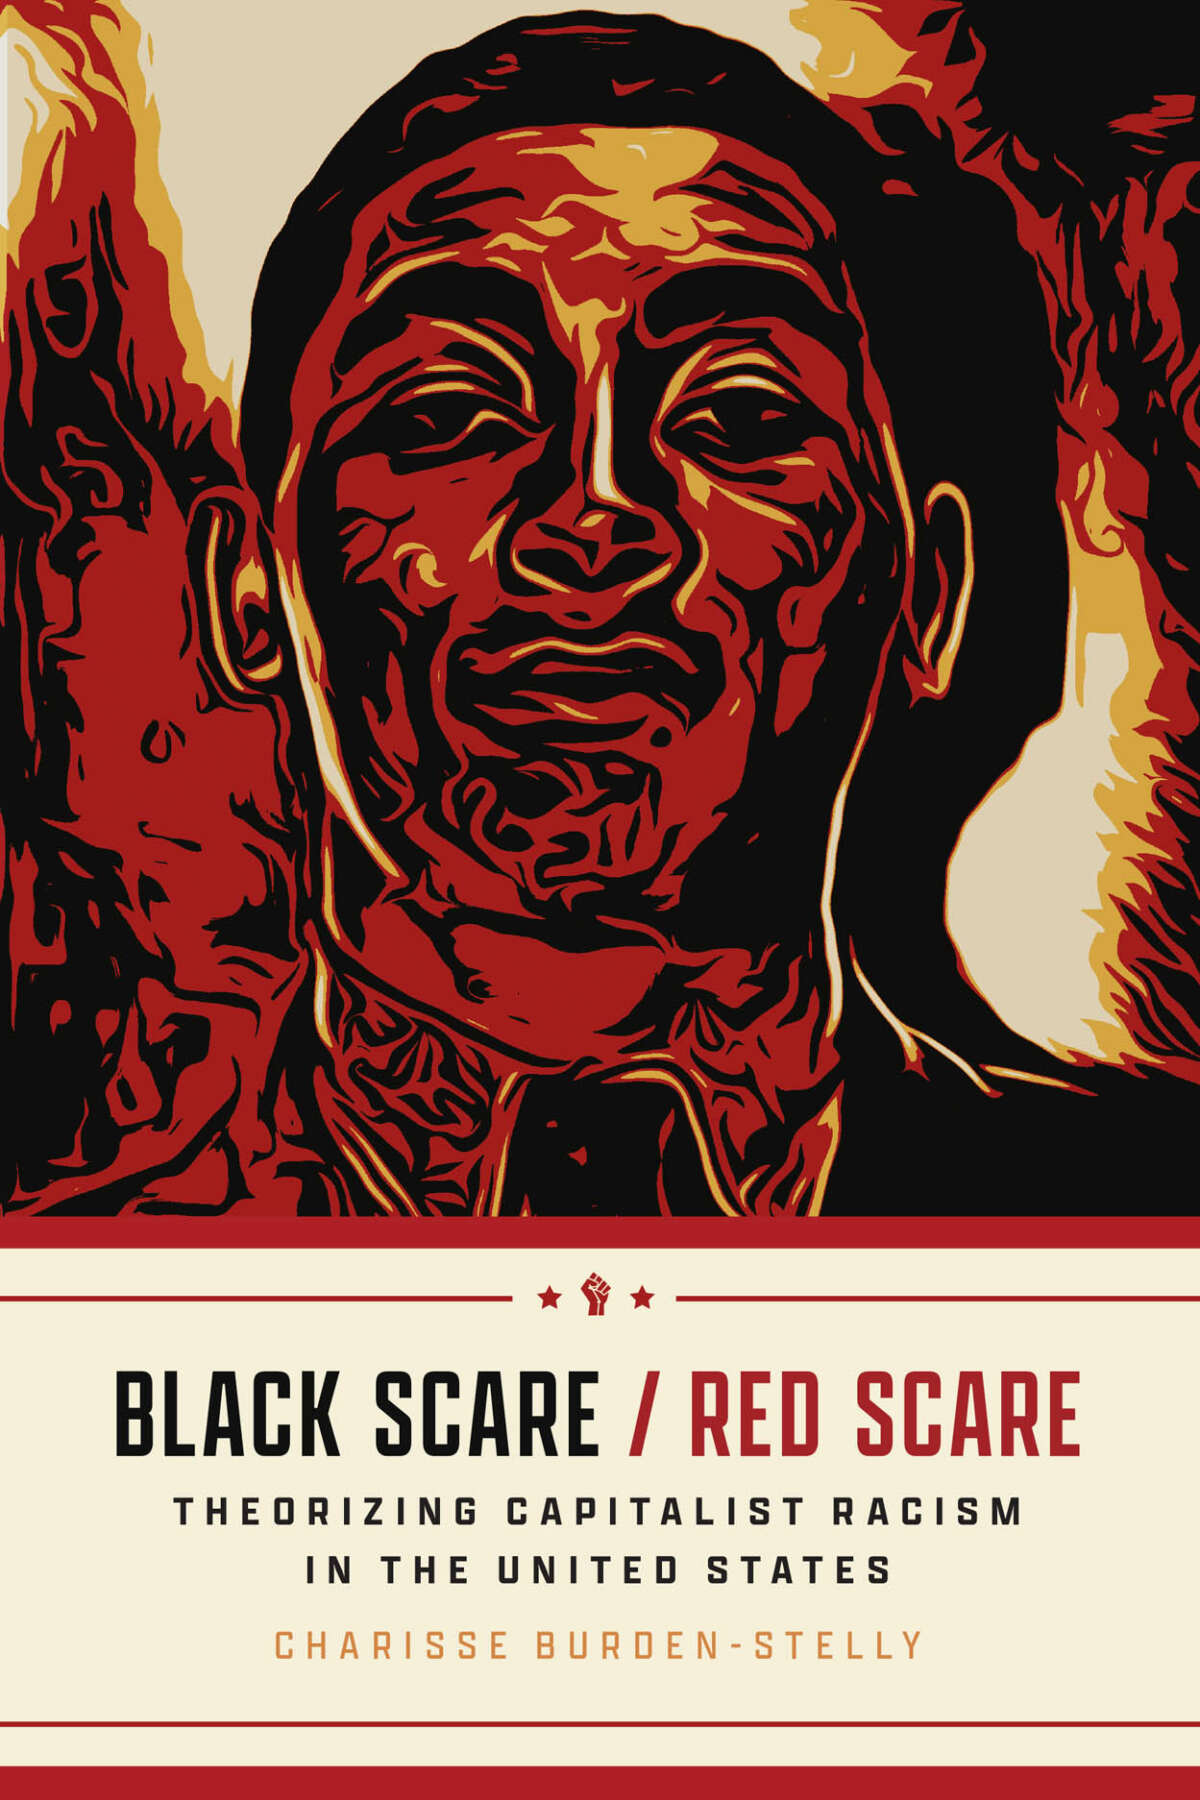 Book cover for Black Scare / Red Scare - Theorizing Capitalist Racism in the United States, featuring an illustration of Angelo Herndon